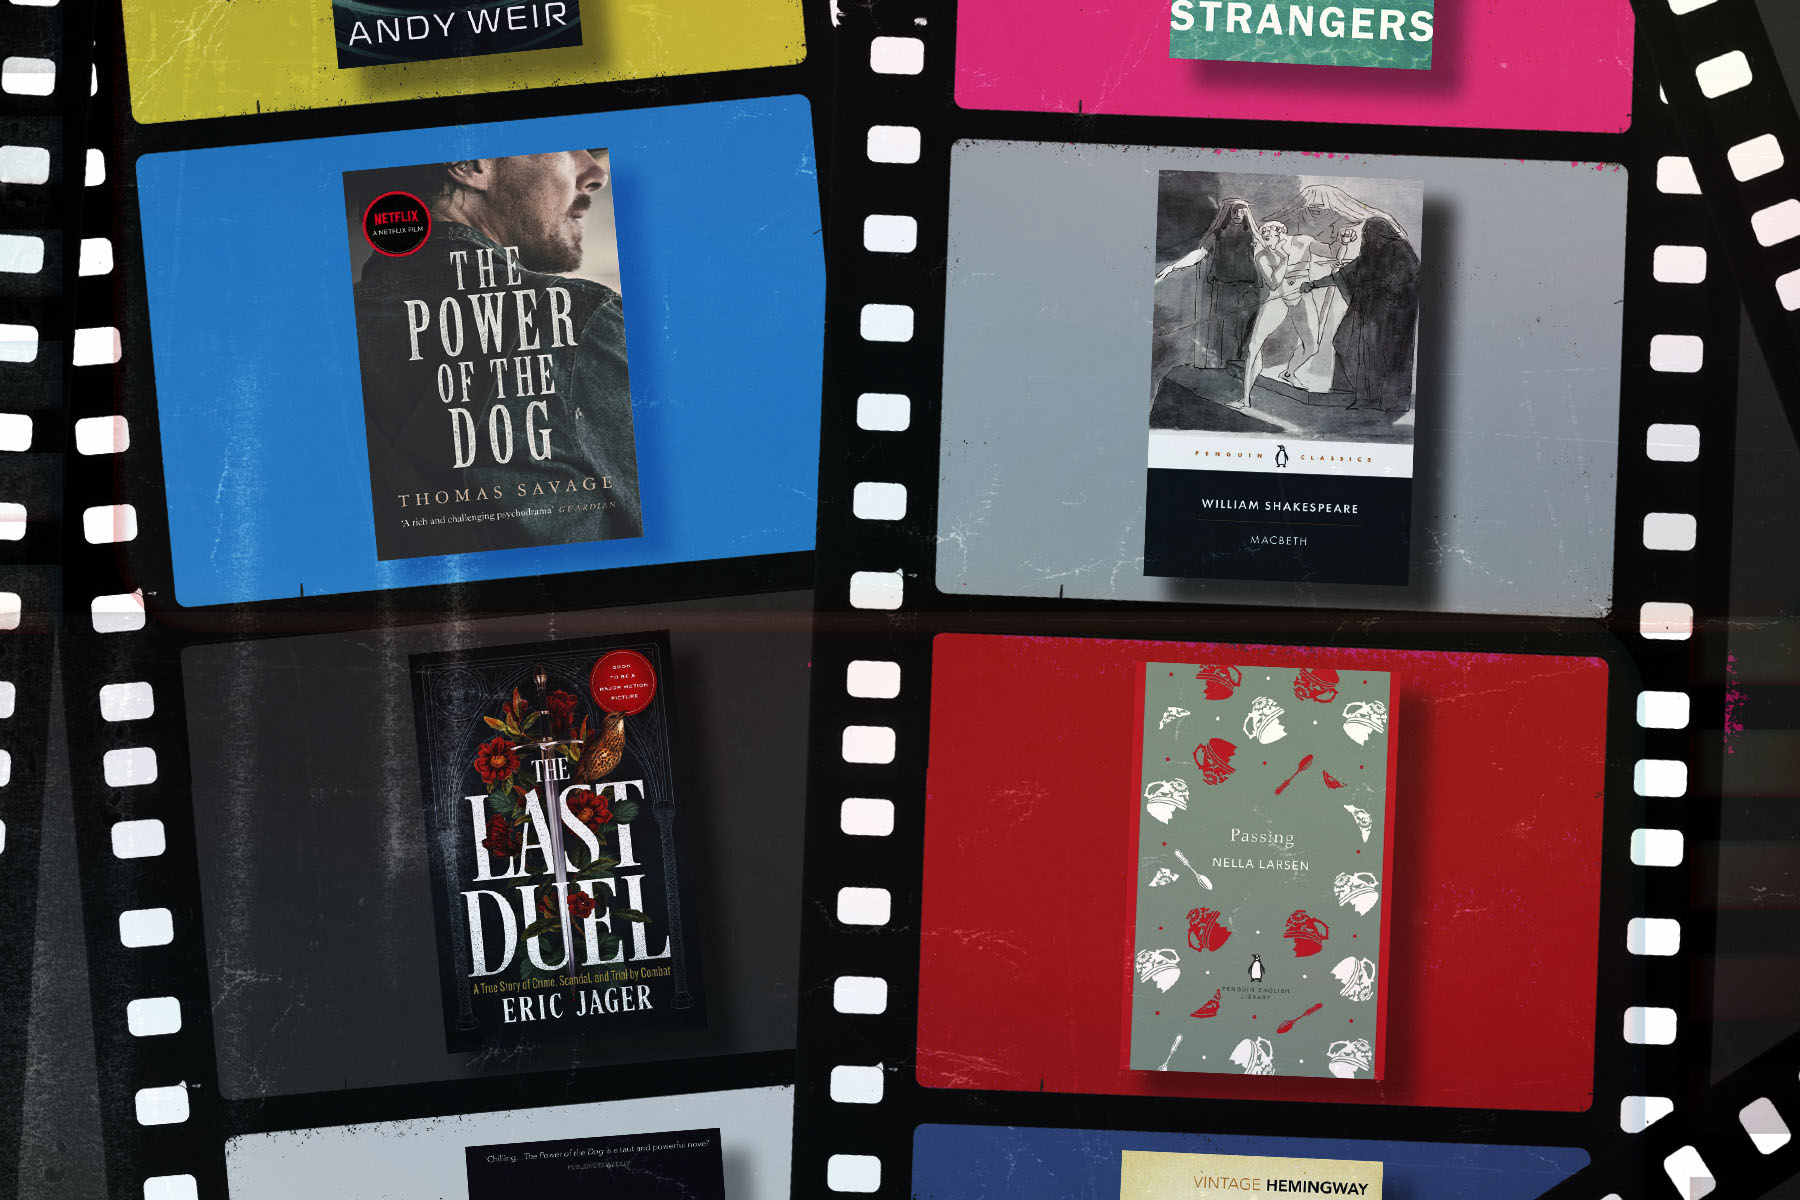 Book covers against a film strip background